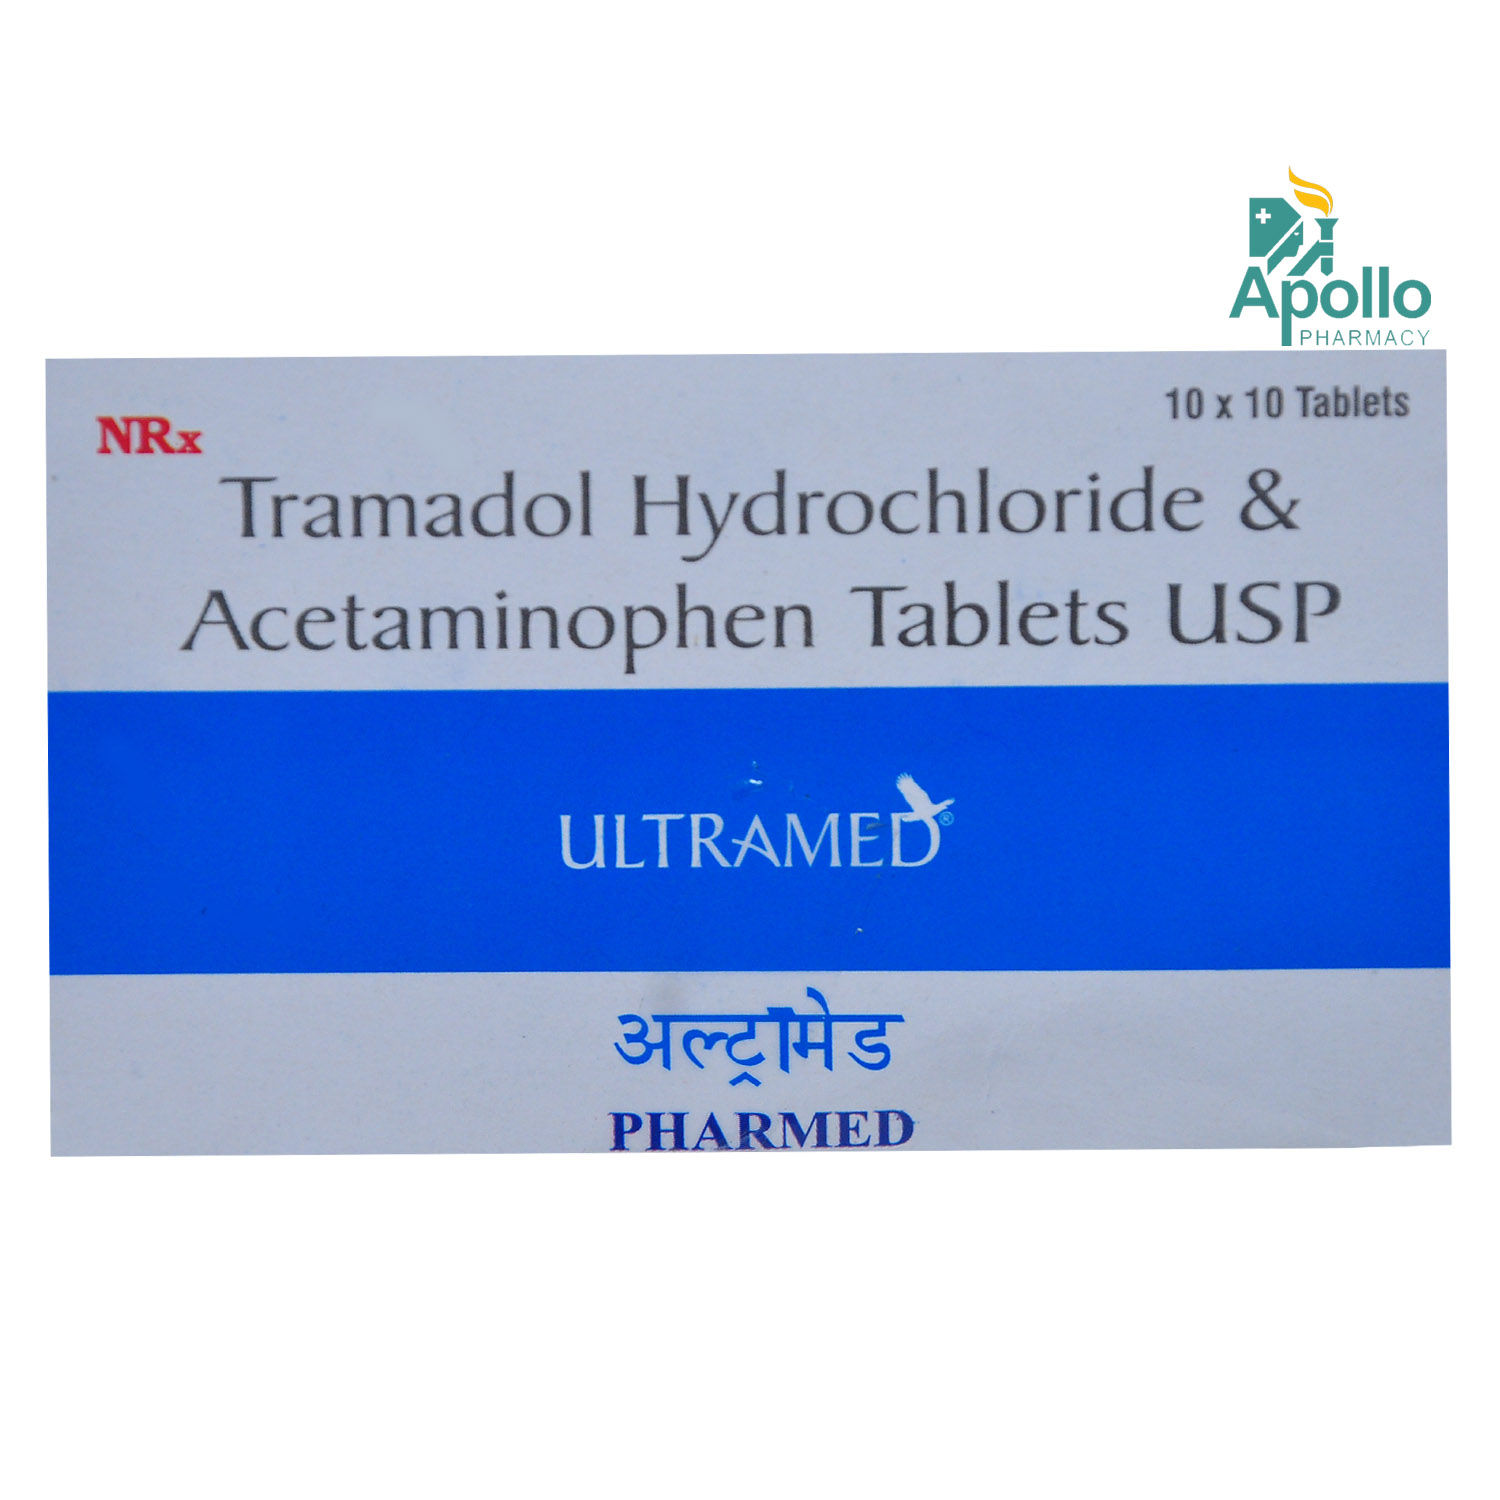 Ultramed Tablet Price Uses Side Effects Composition Apollo 24 7